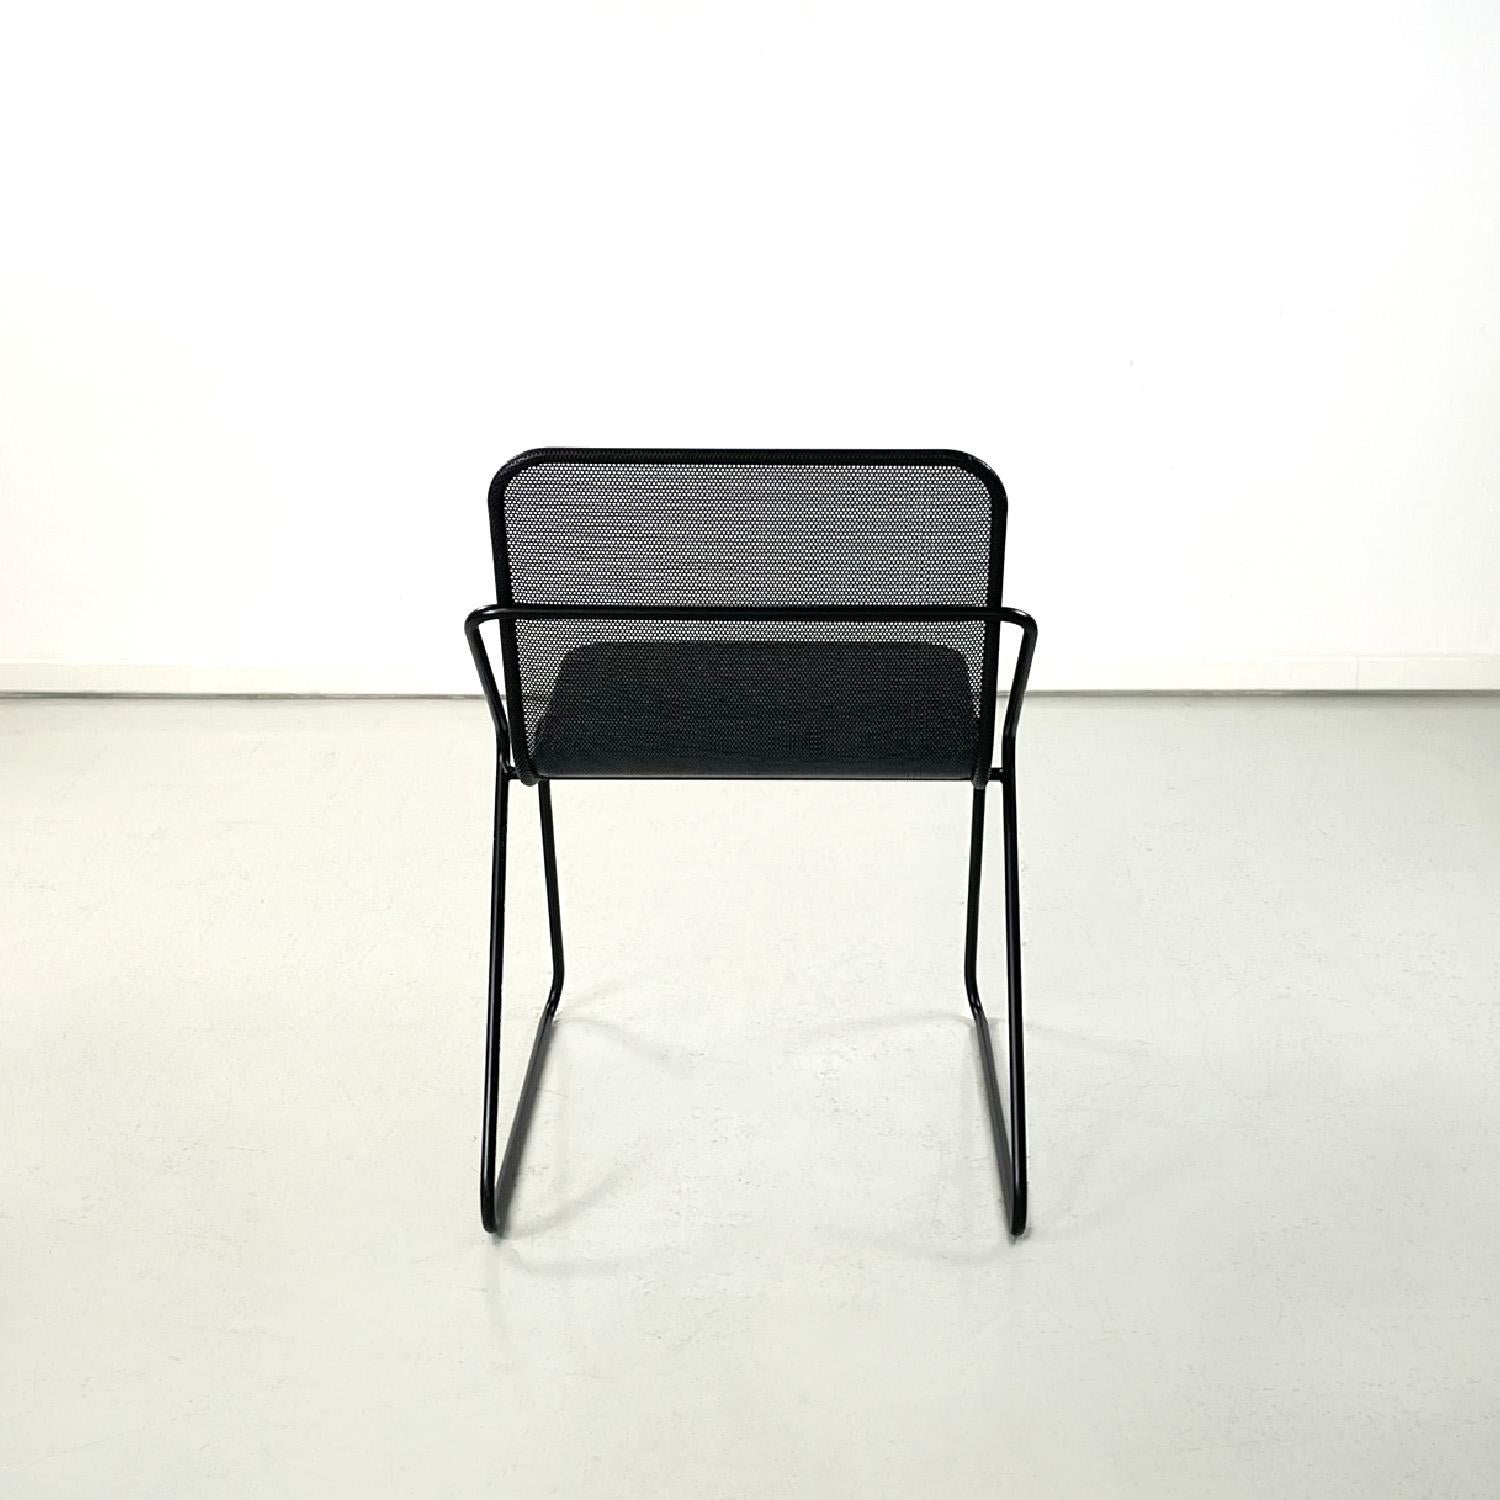 Late 20th Century Italian modern metal rod and perforated metal sheet black metal chair, 1980s For Sale